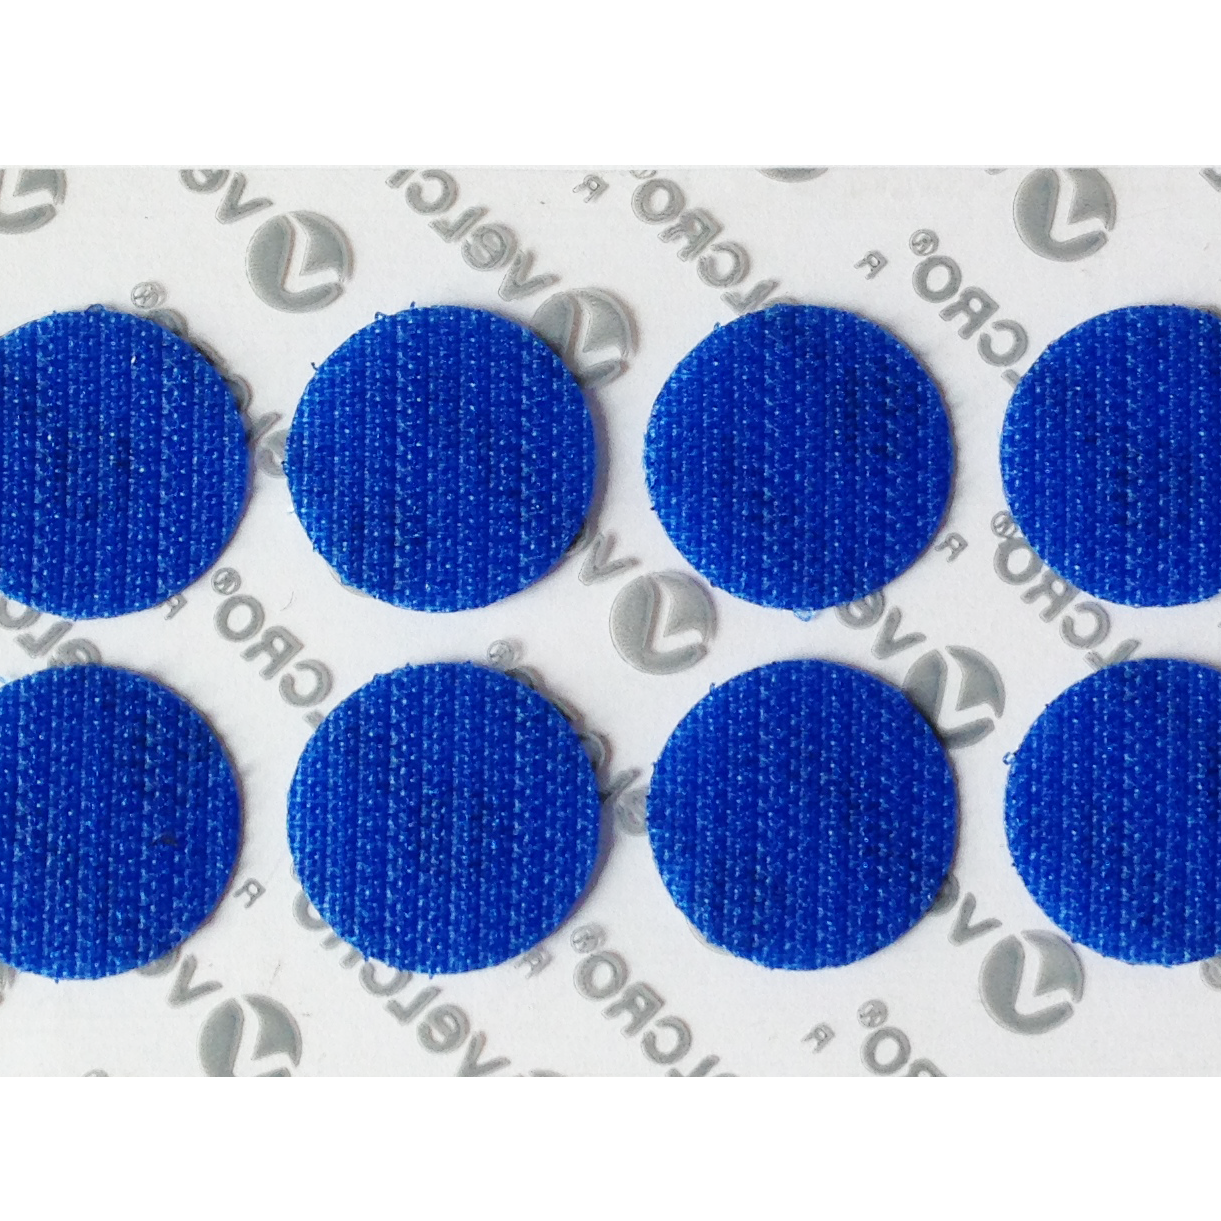 VELCRO® BRAND VELCOIN® COINS, CIRCLES, & DOTS  Full Line of VELCRO®  Products from Textol Systems